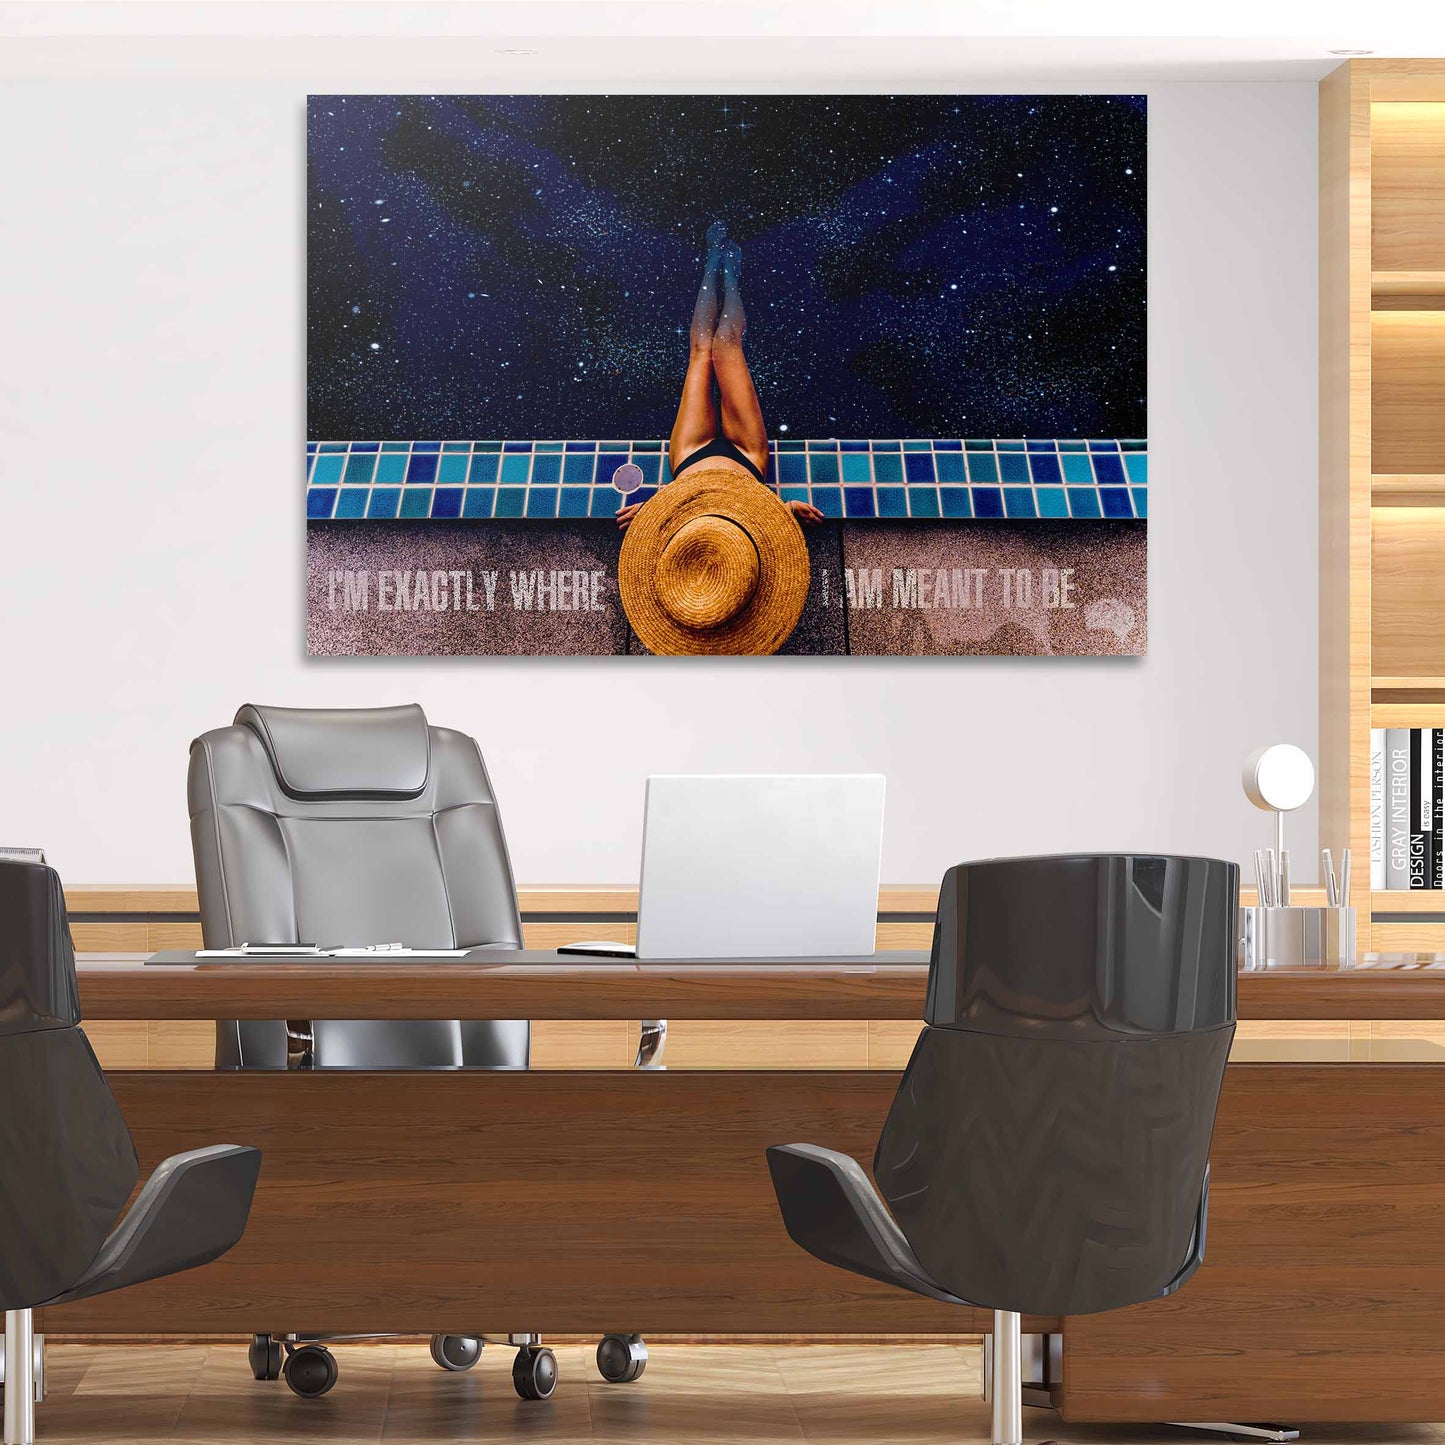 Meant To Be Star Pool Wall Art | Inspirational Wall Art Motivational Wall Art Quotes Office Art | ImpaktMaker Exclusive Canvas Art Landscape